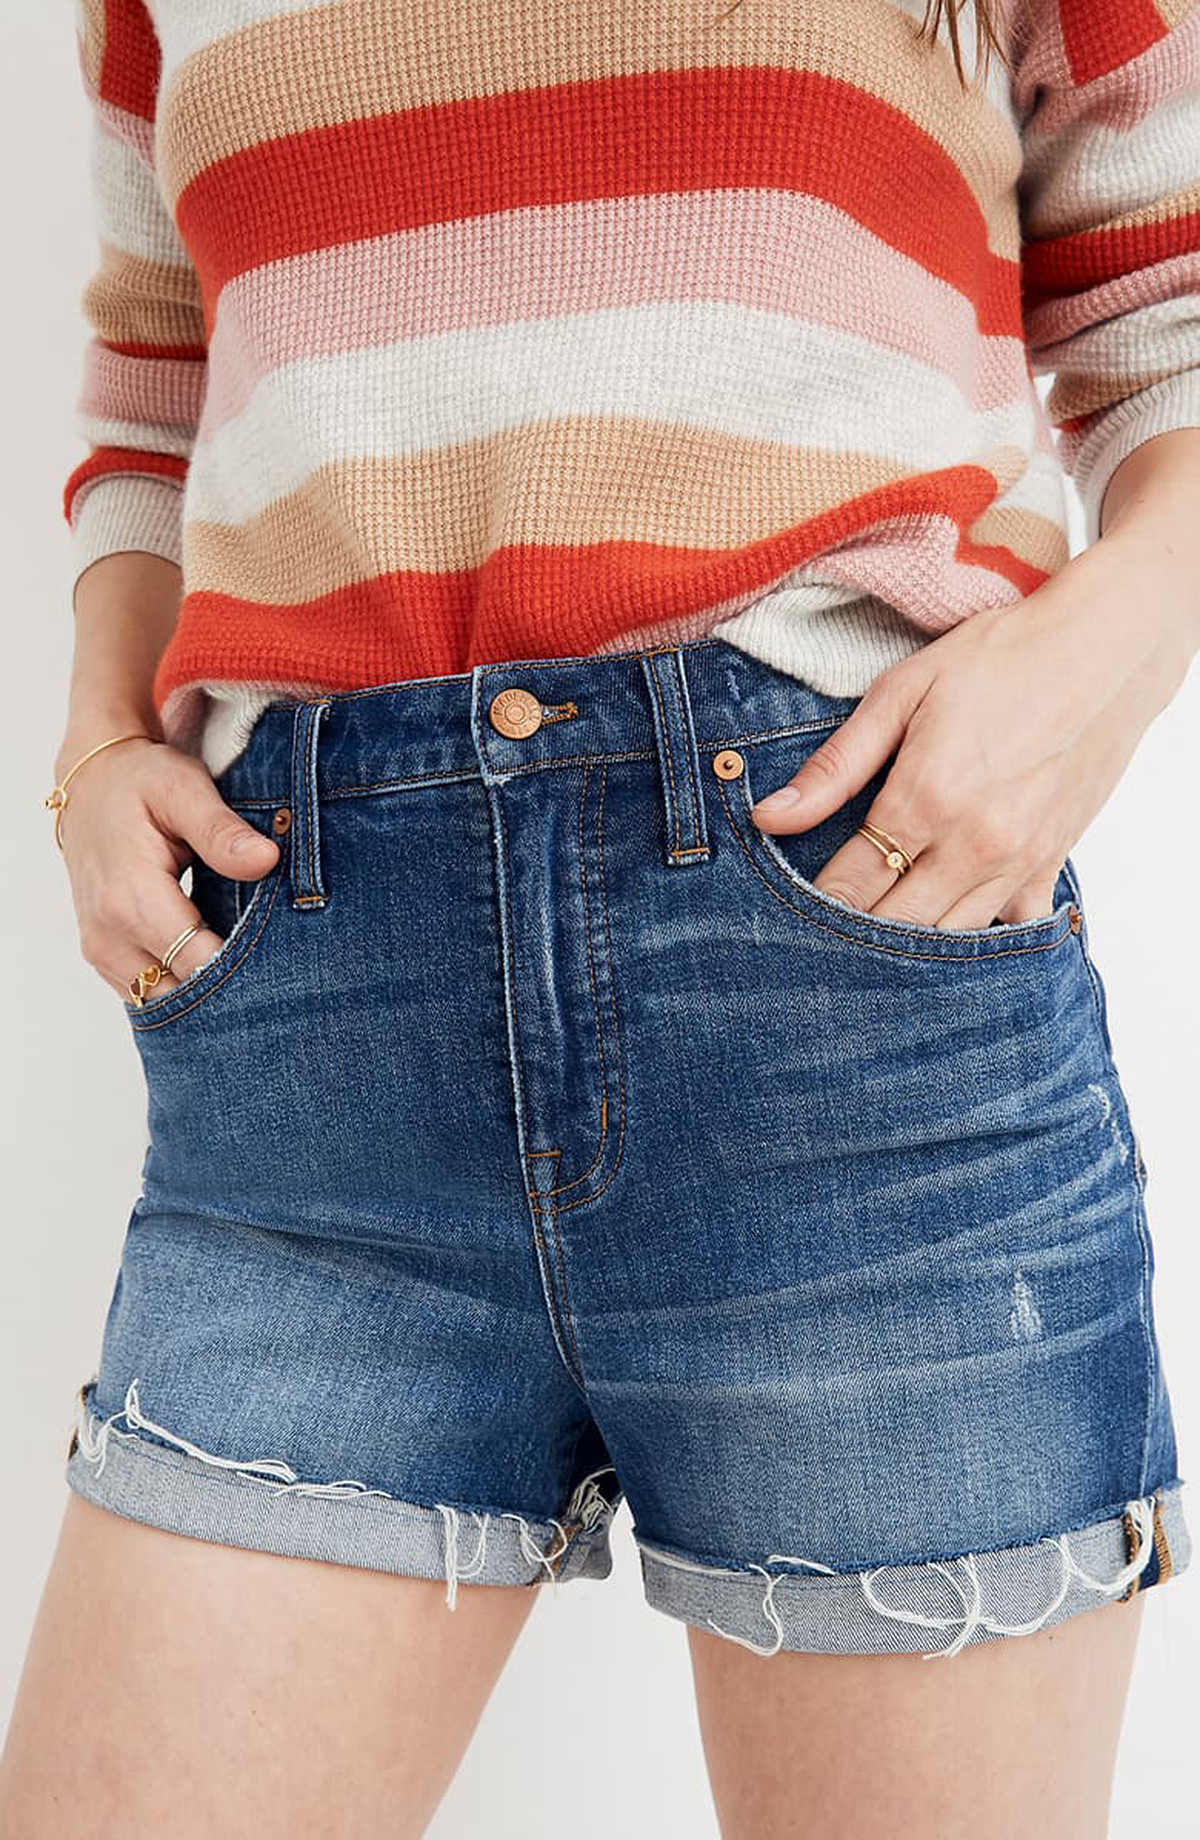 Why Girls Don't Care If Guys Hate High-Waisted Shorts